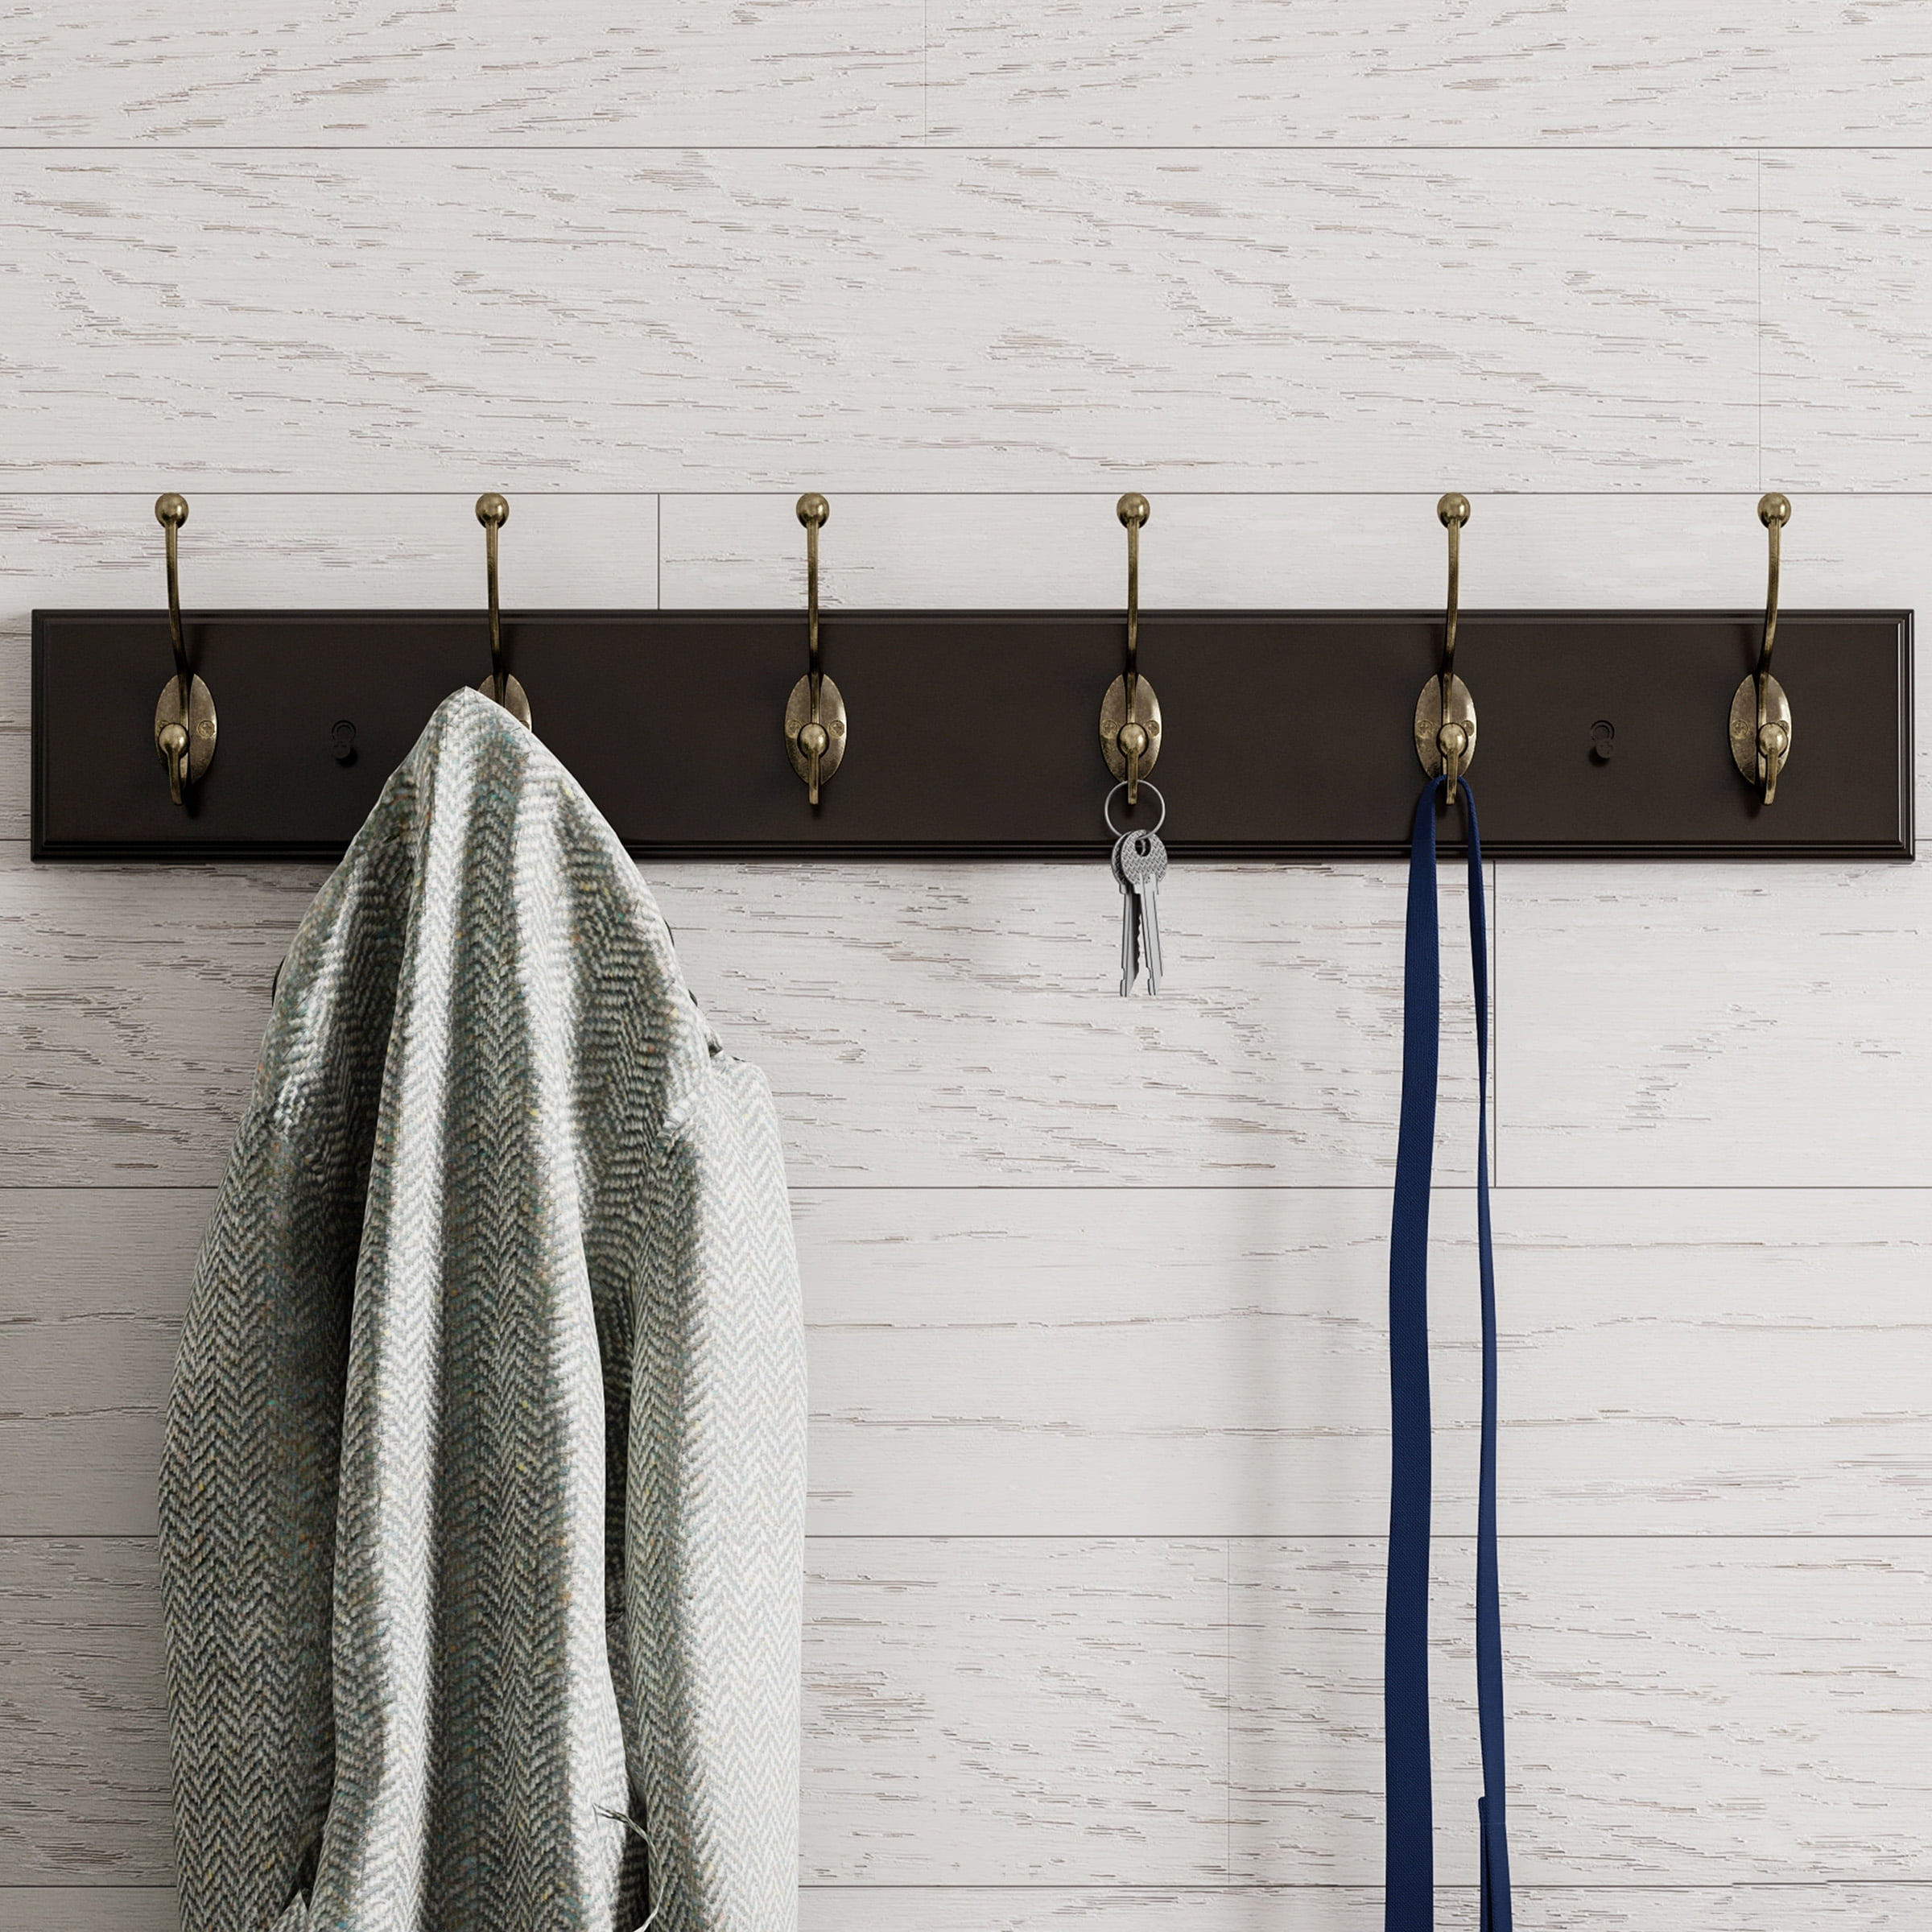 Wall Hook Rail-Mounted Hanging Rack with 6 Hooks-Entryway, Hallway, or Bedroom-Storage Organization for Coats, Towels, Bags by Lavish Home (Brown)